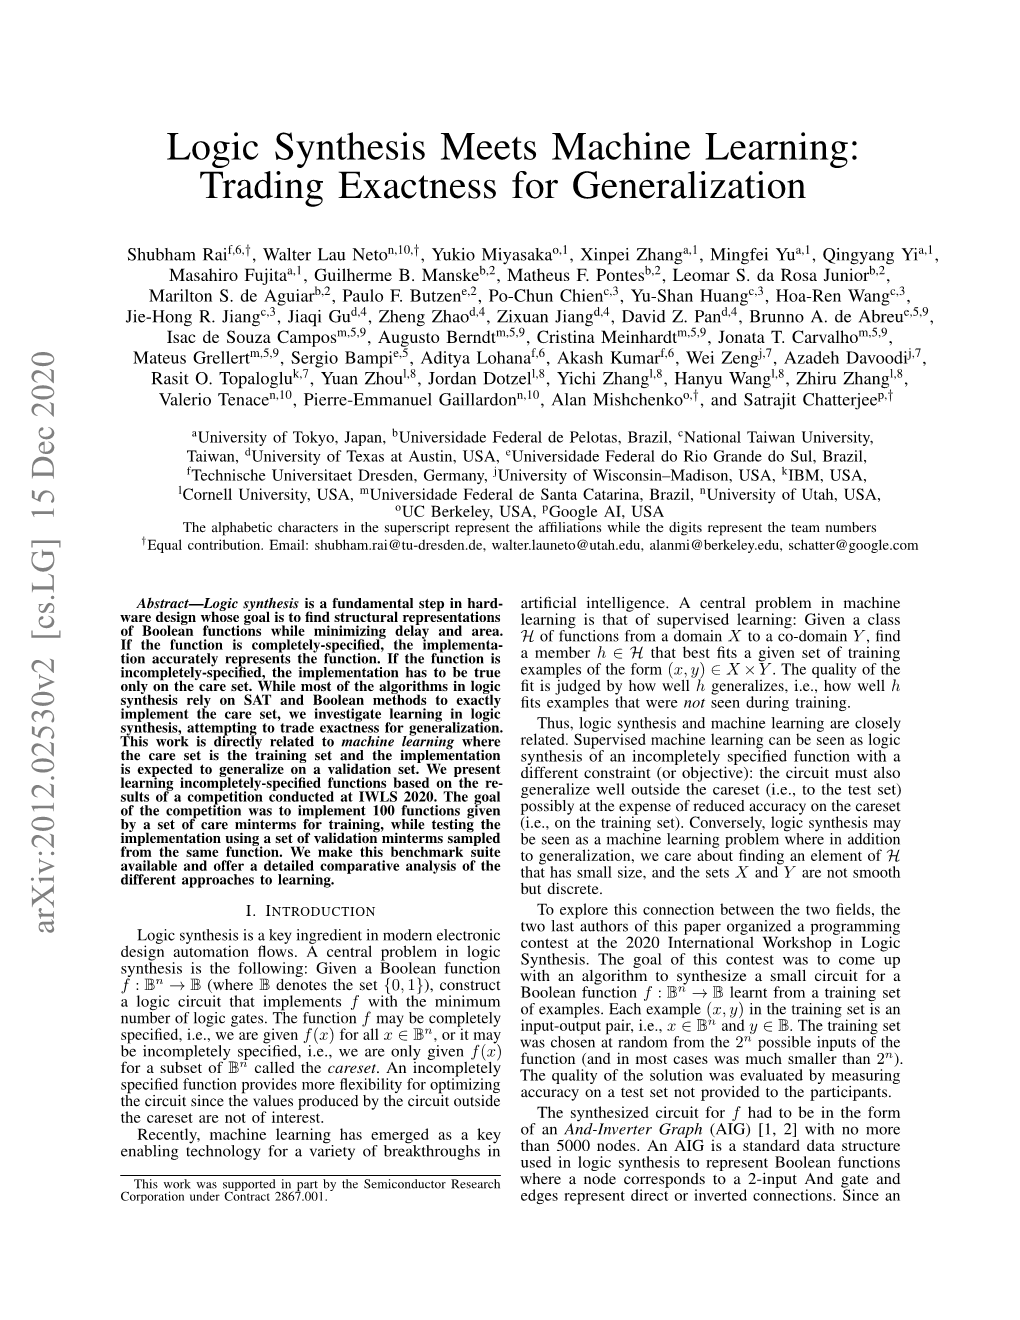 Logic Synthesis Meets Machine Learning: Trading Exactness for Generalization